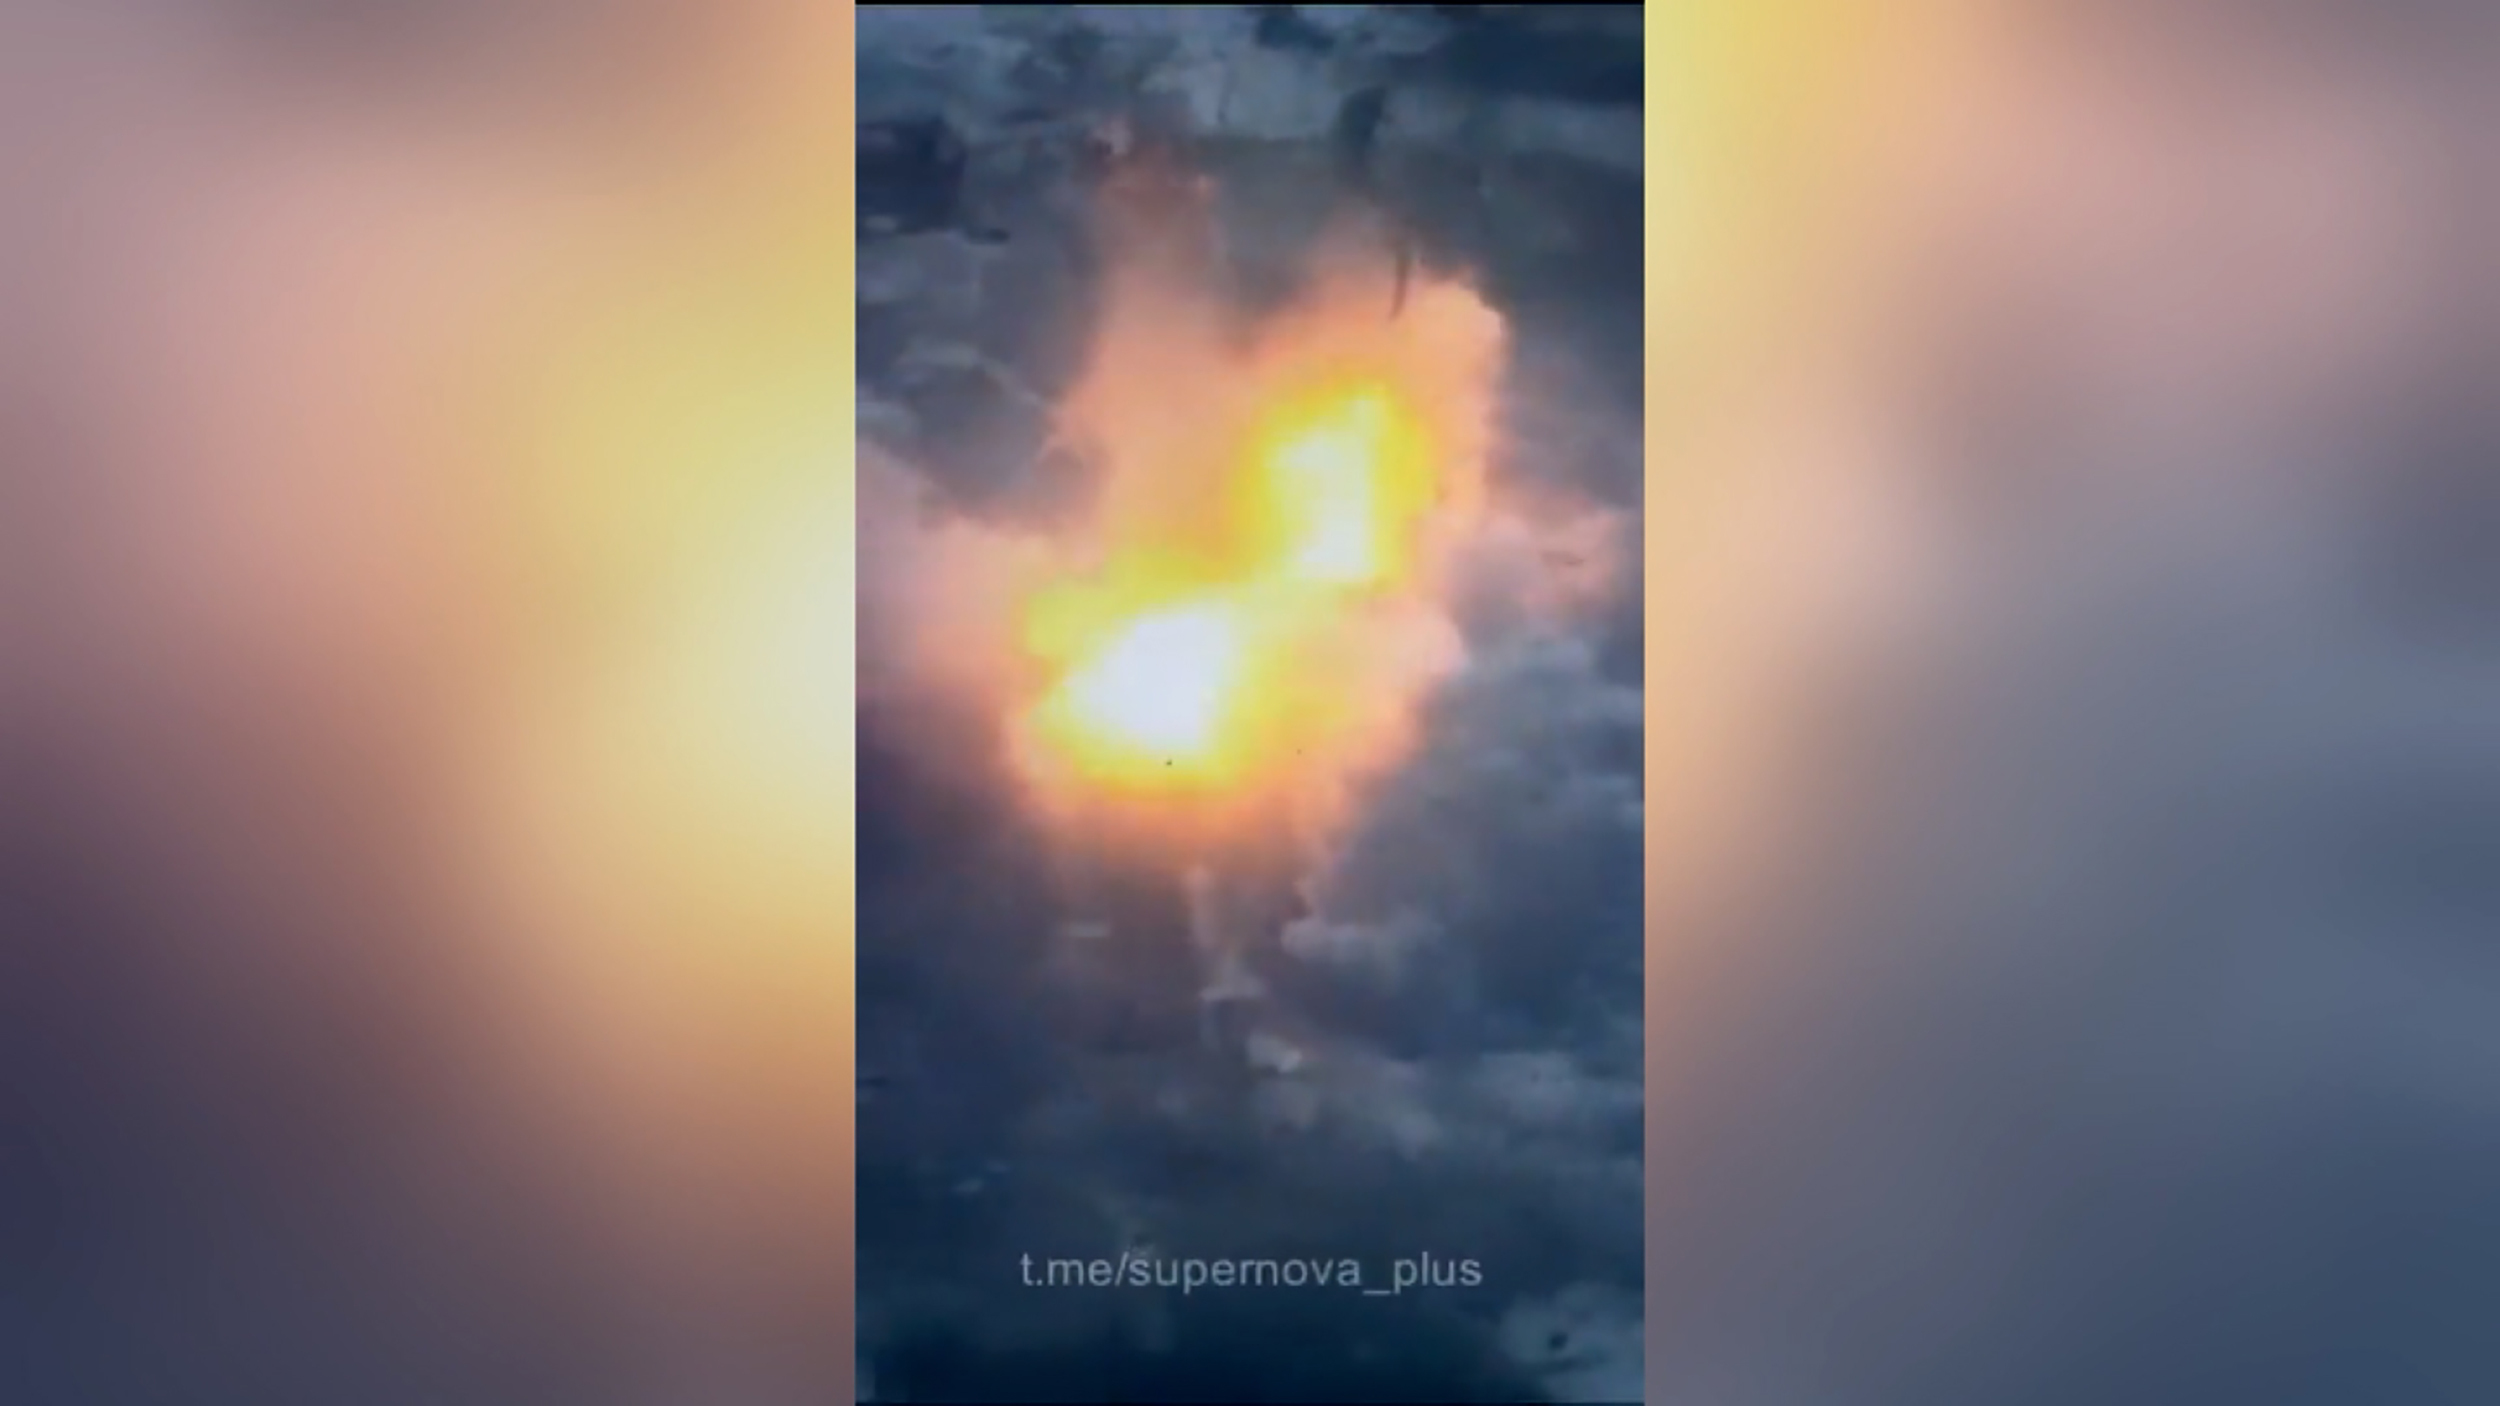 In this still taken from video, an explosion can be seen at a building that appears to have been a shelter for Russian troops.